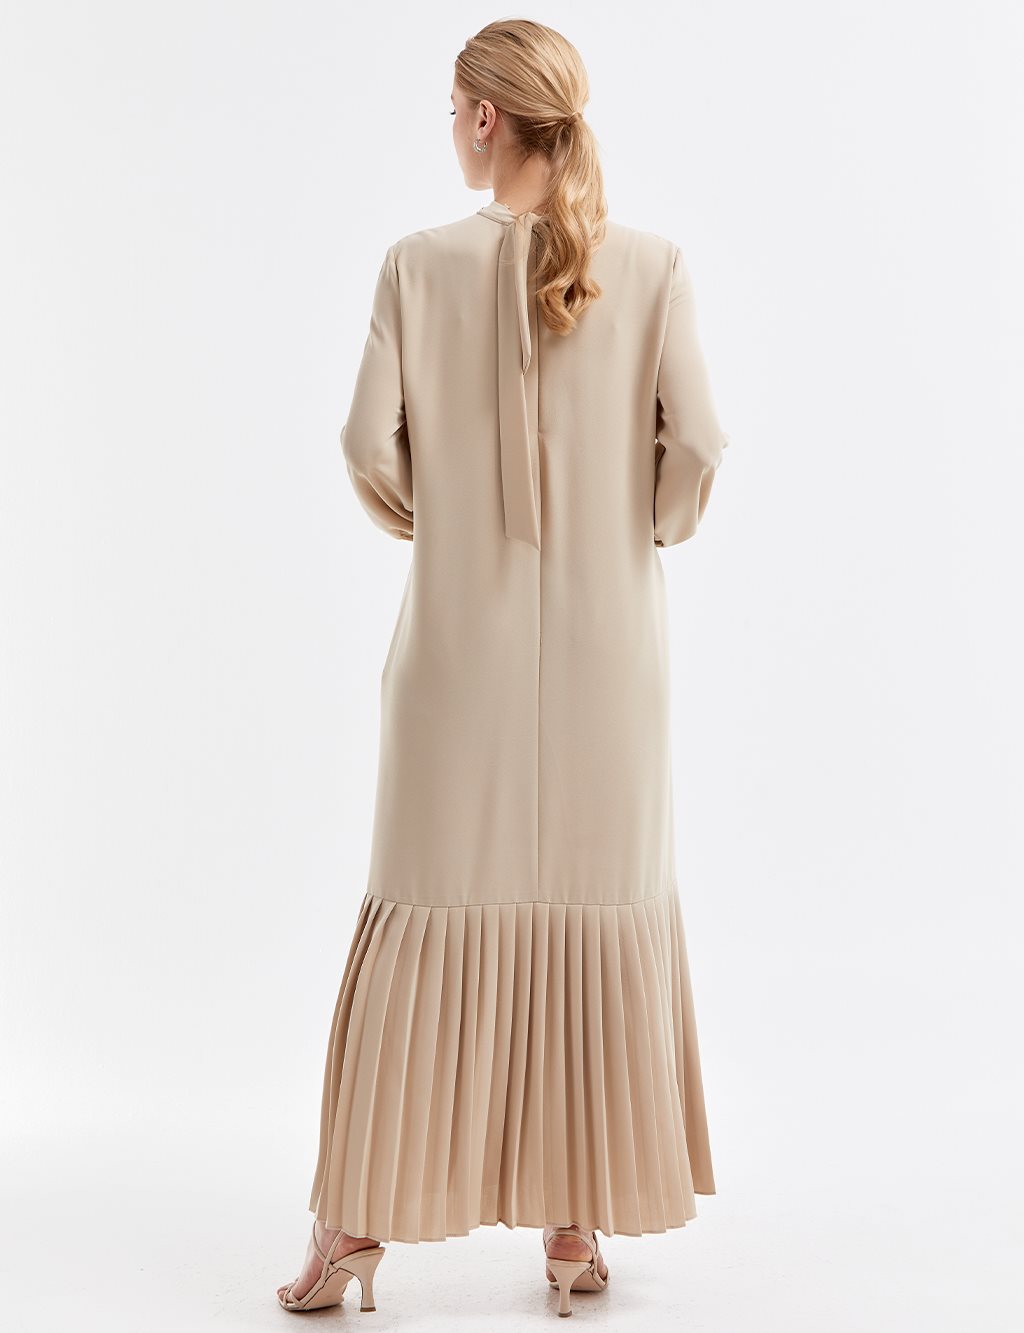 Stone Embroidered Pleated Dress in Beige Sand